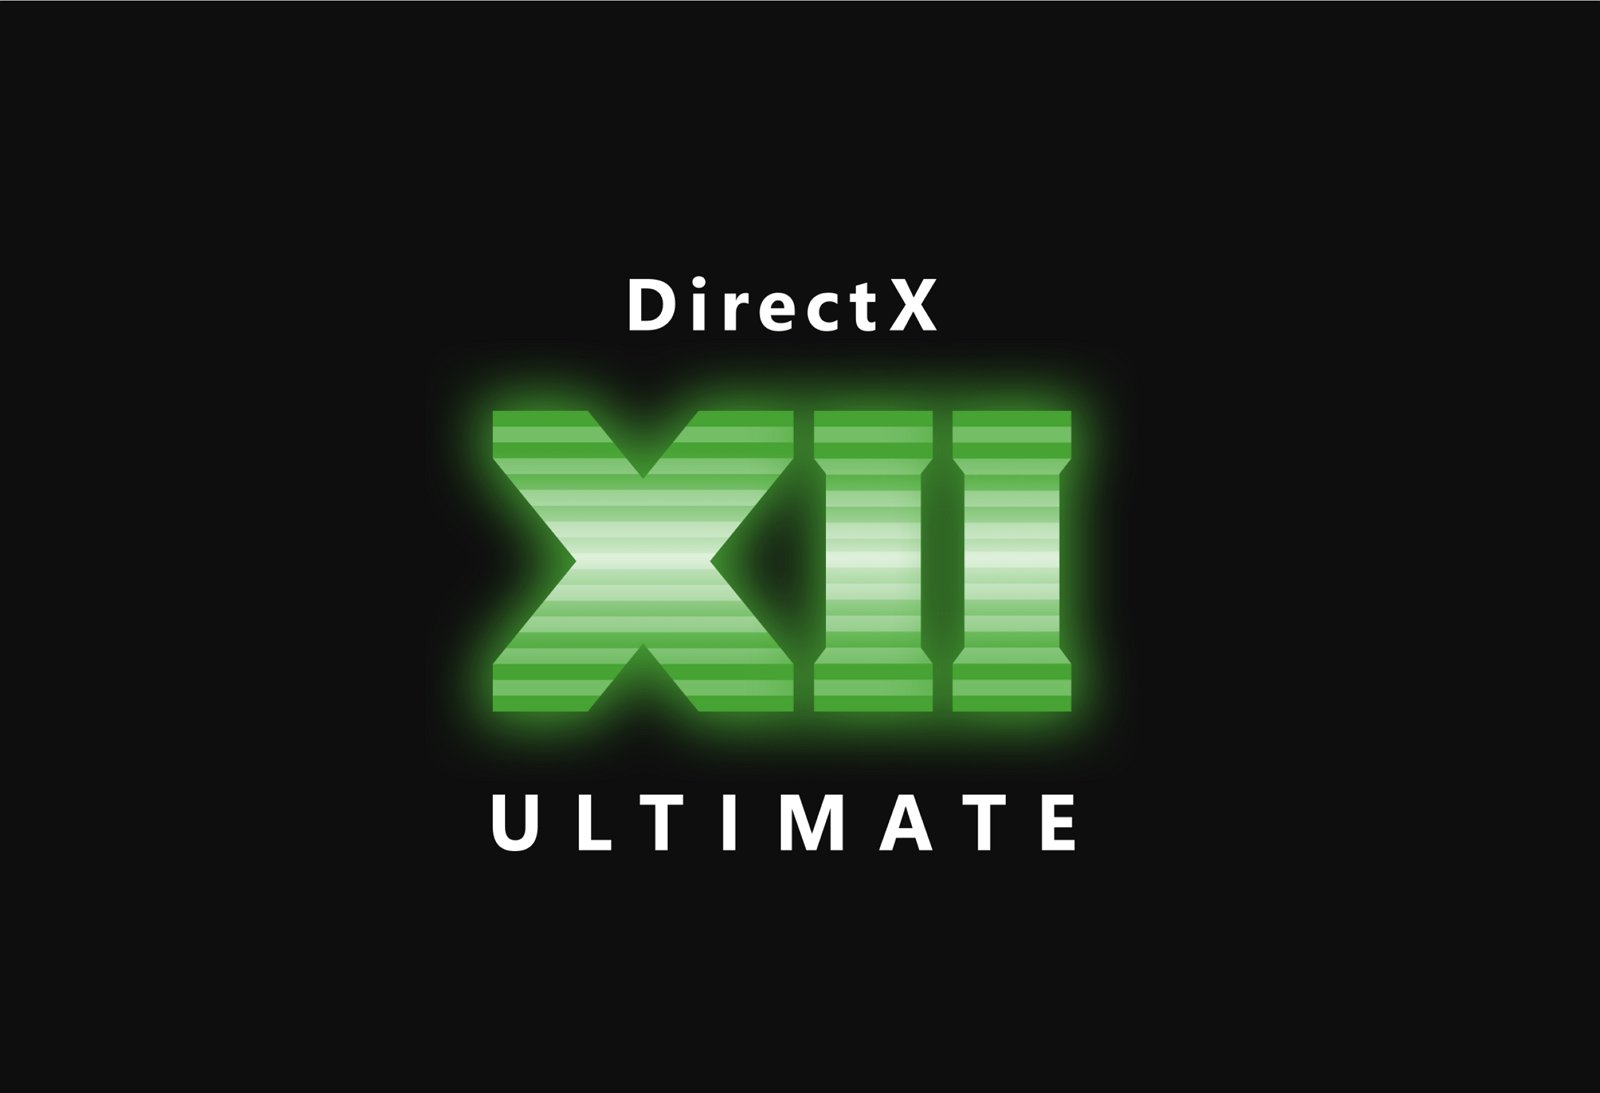 Microsoft confirms long-overdue DirectX 12 will be unveiled at GDC